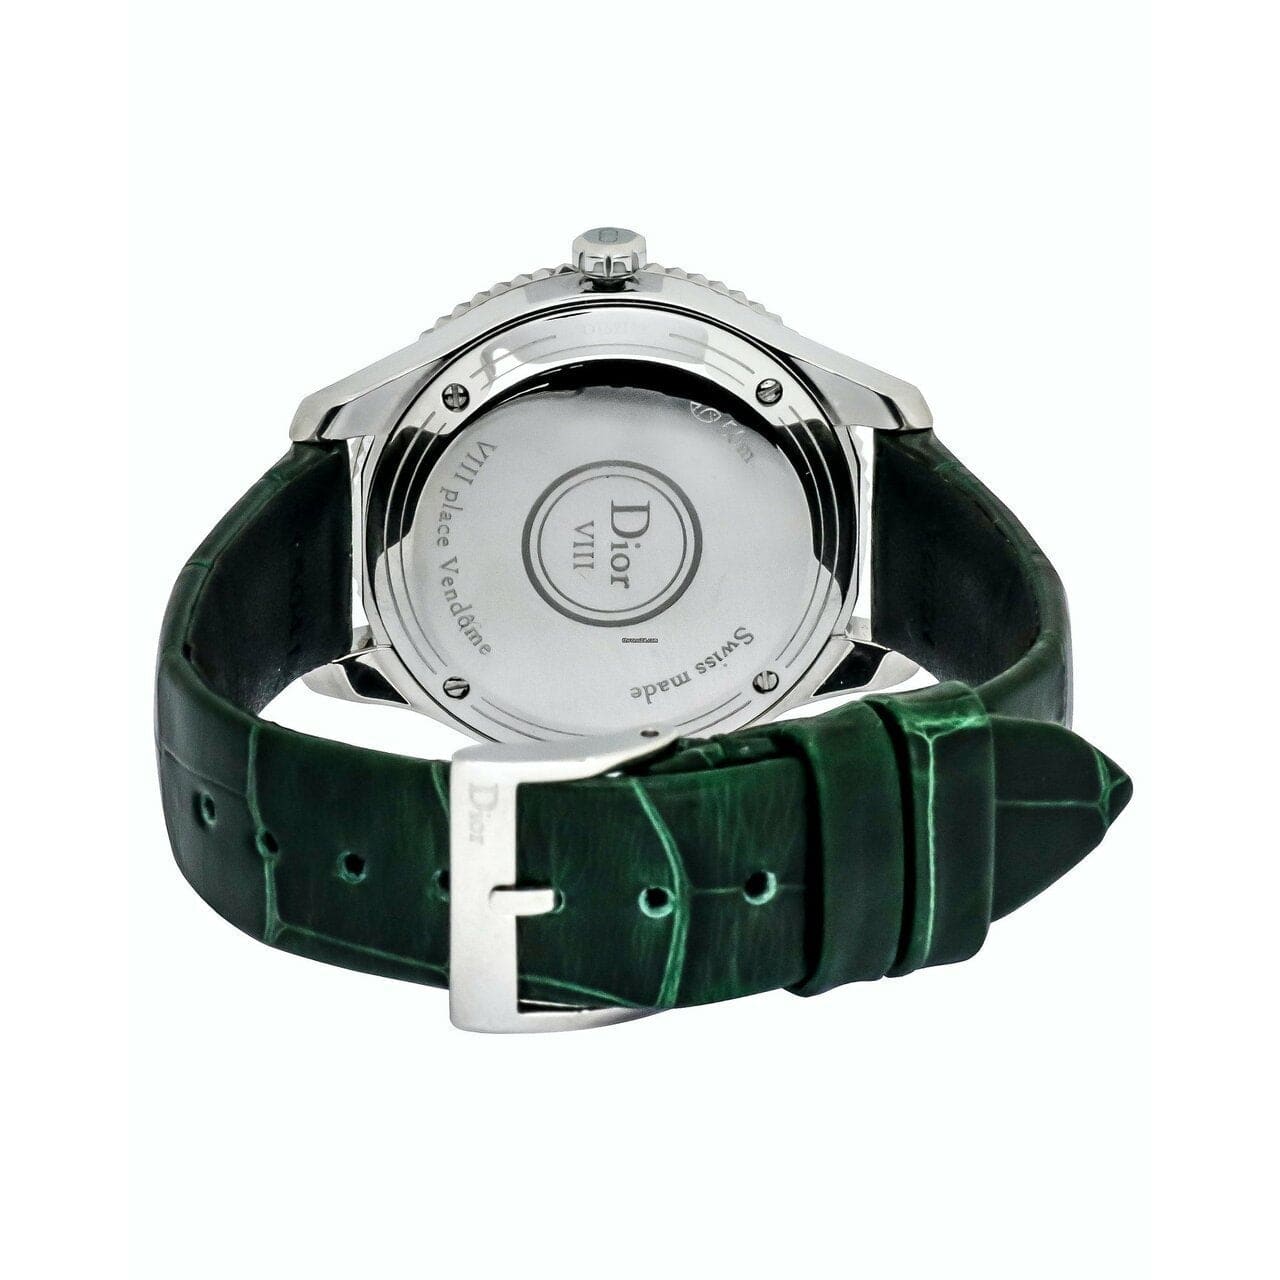 Dior CD152112A001 Montaigne White Dial Women’s Green Leather